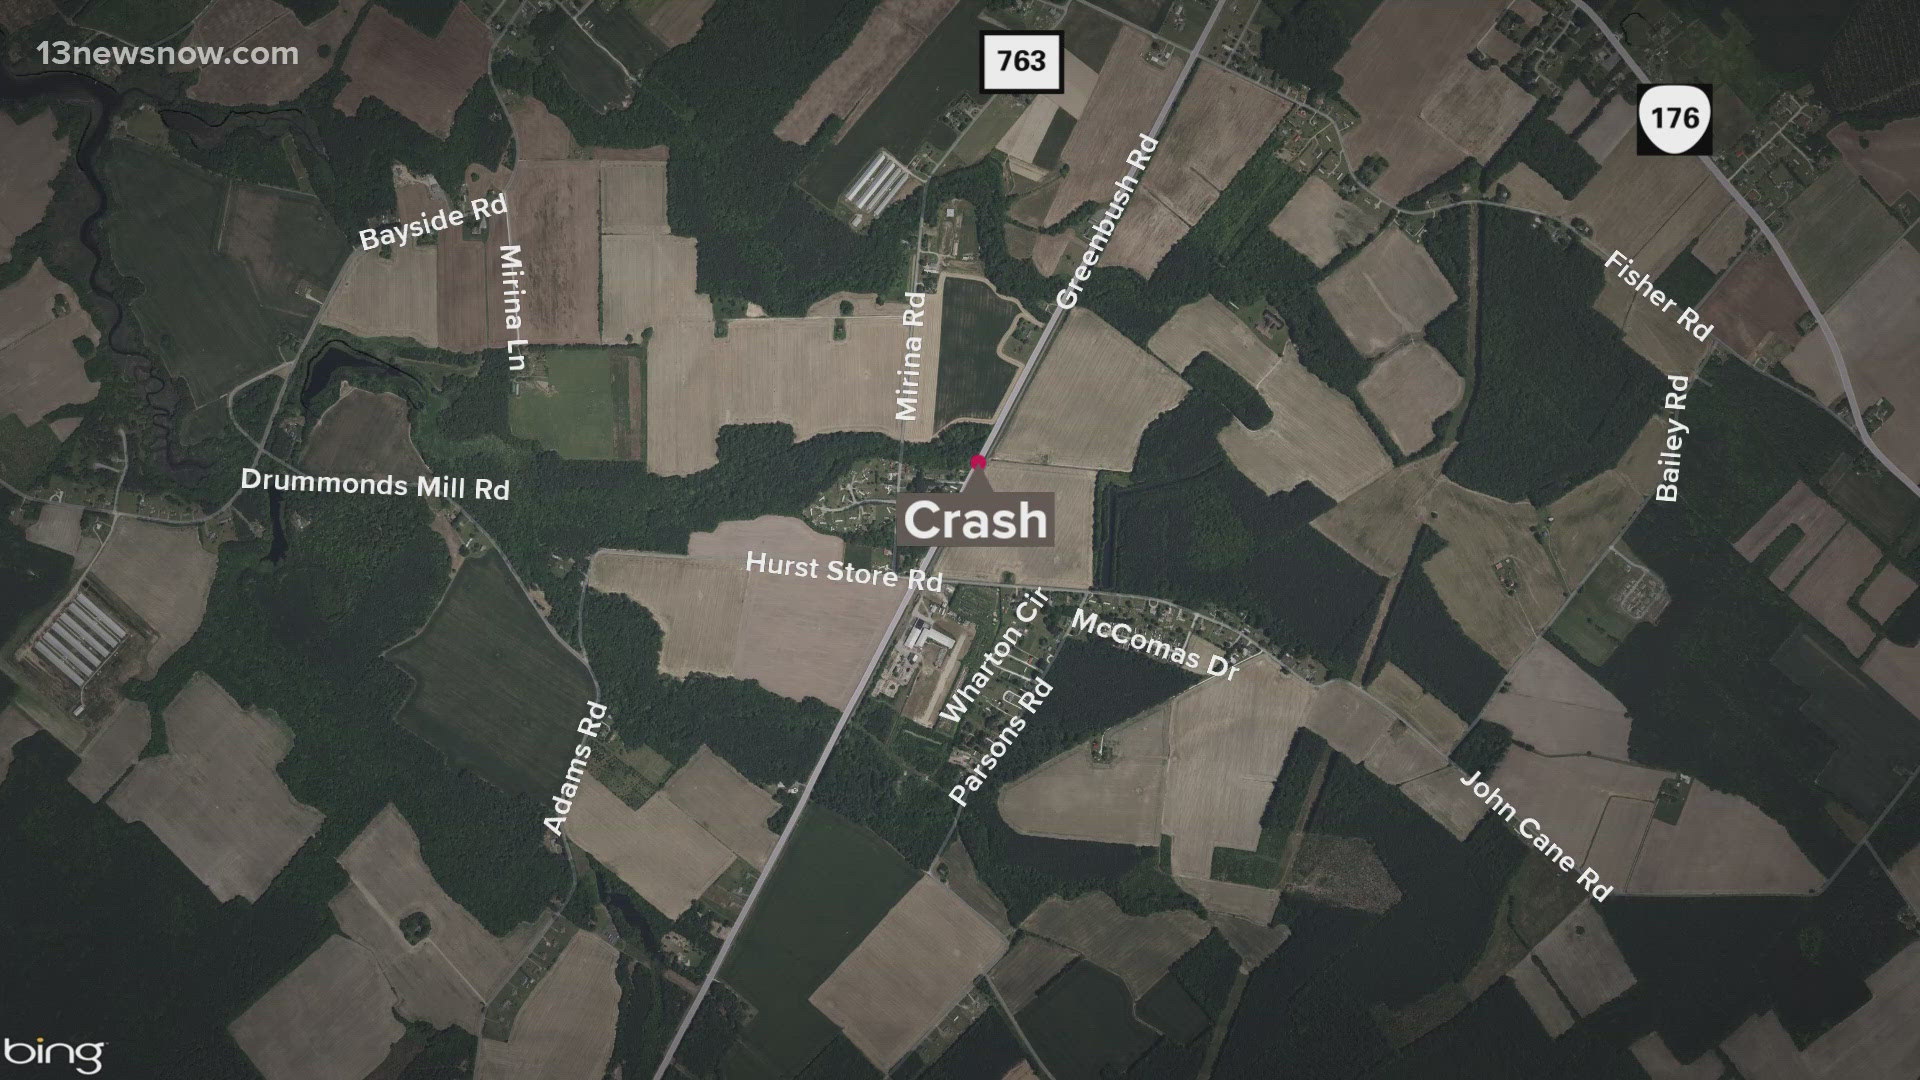 Virginia State Police (VSP) are investigating a two-vehicle crash that happened Sunday around 1:45 a.m. on Greenbush Road.